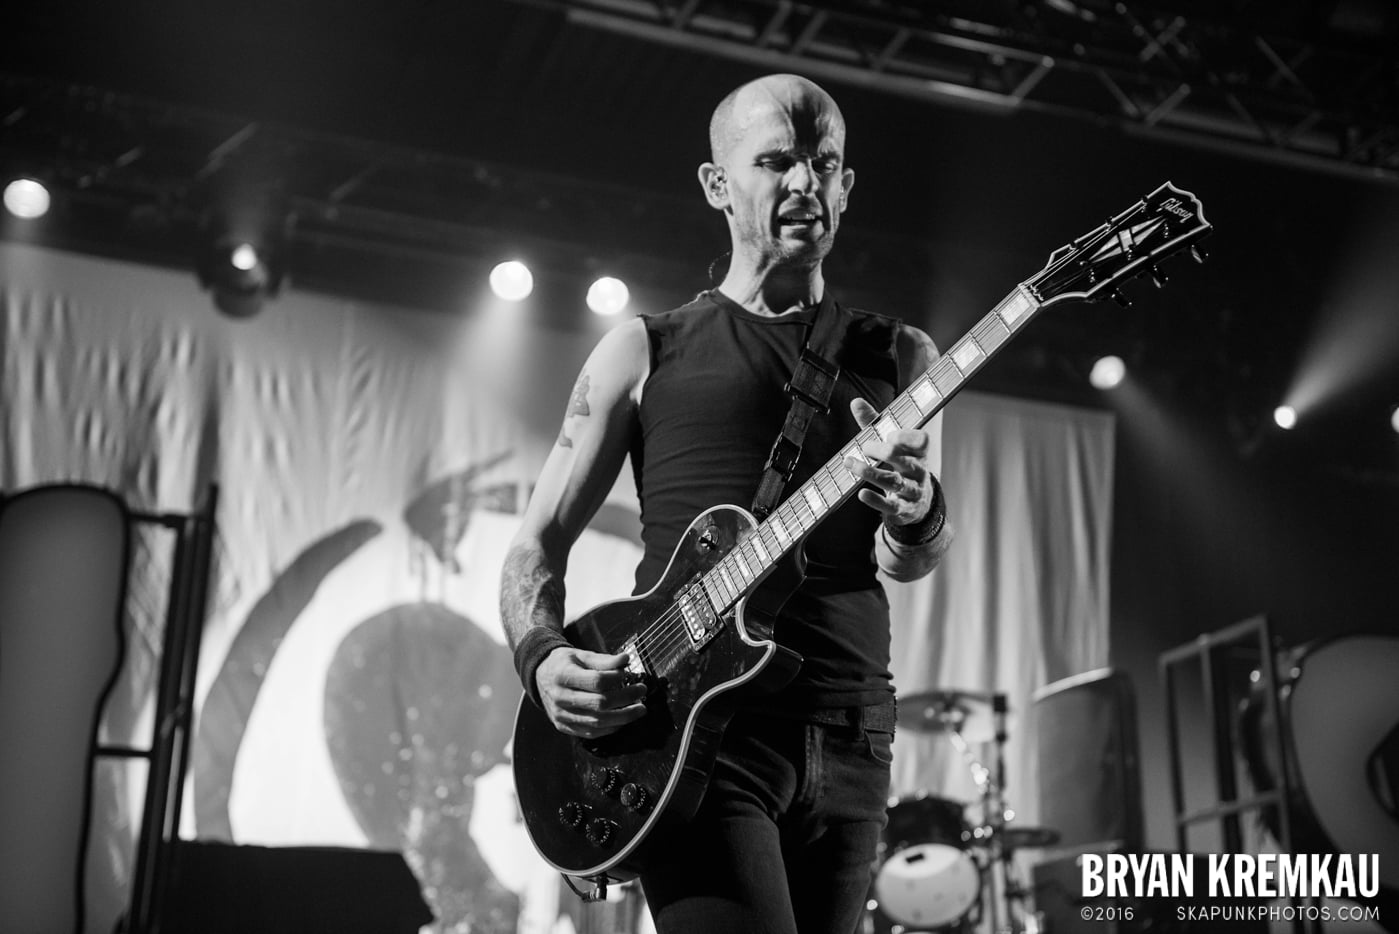 Rise Against @ Best Buy Theater, NYC - 9.26.14 (15)